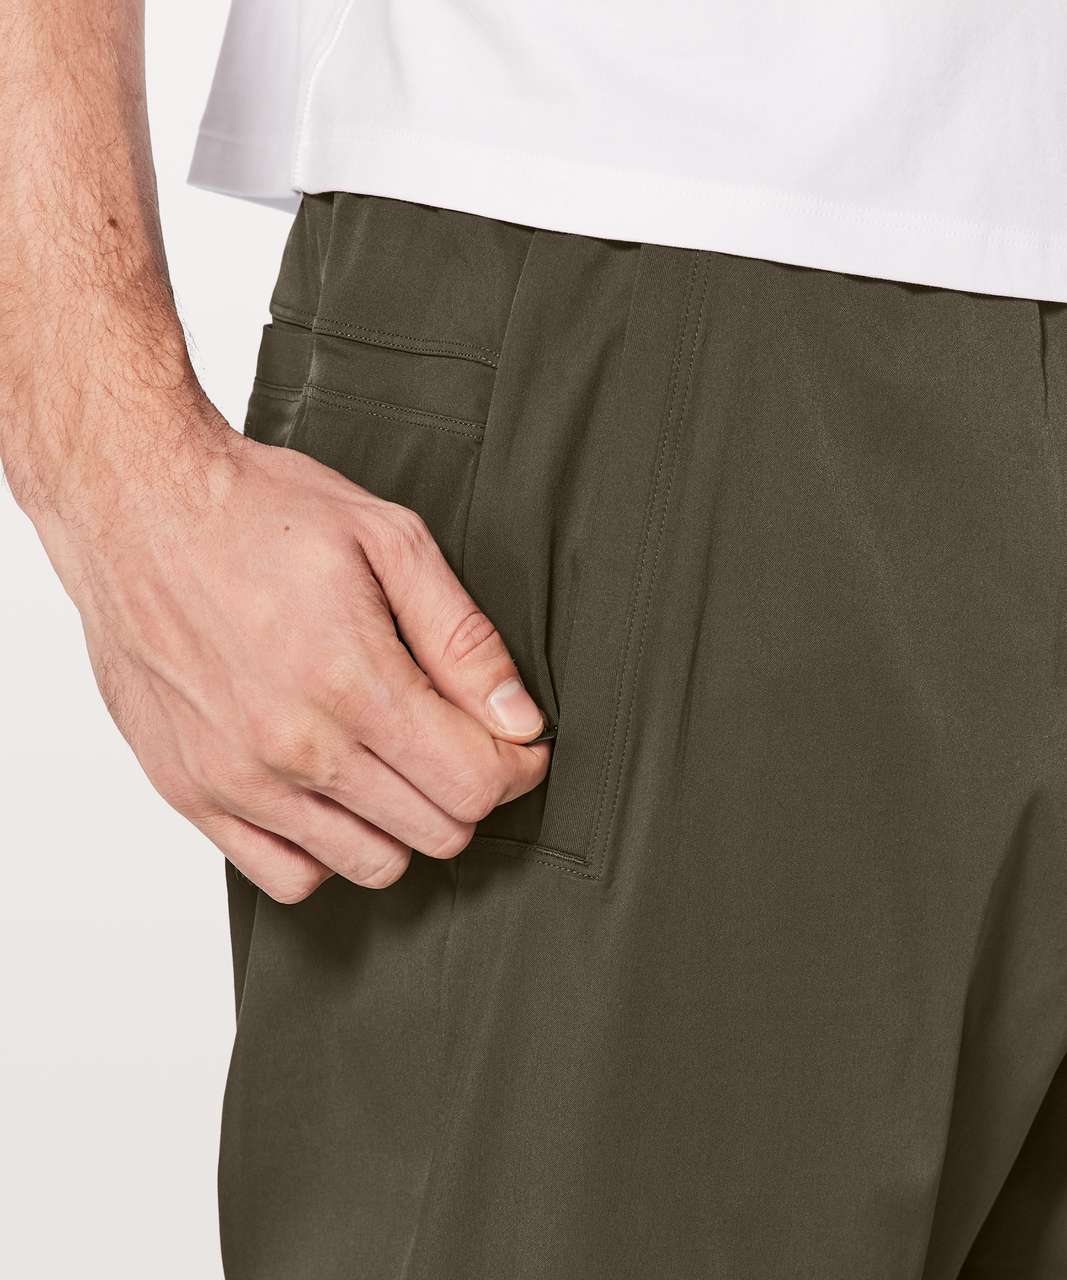 Lululemon Great Wall Pant *32" - Dark Olive (First Release)